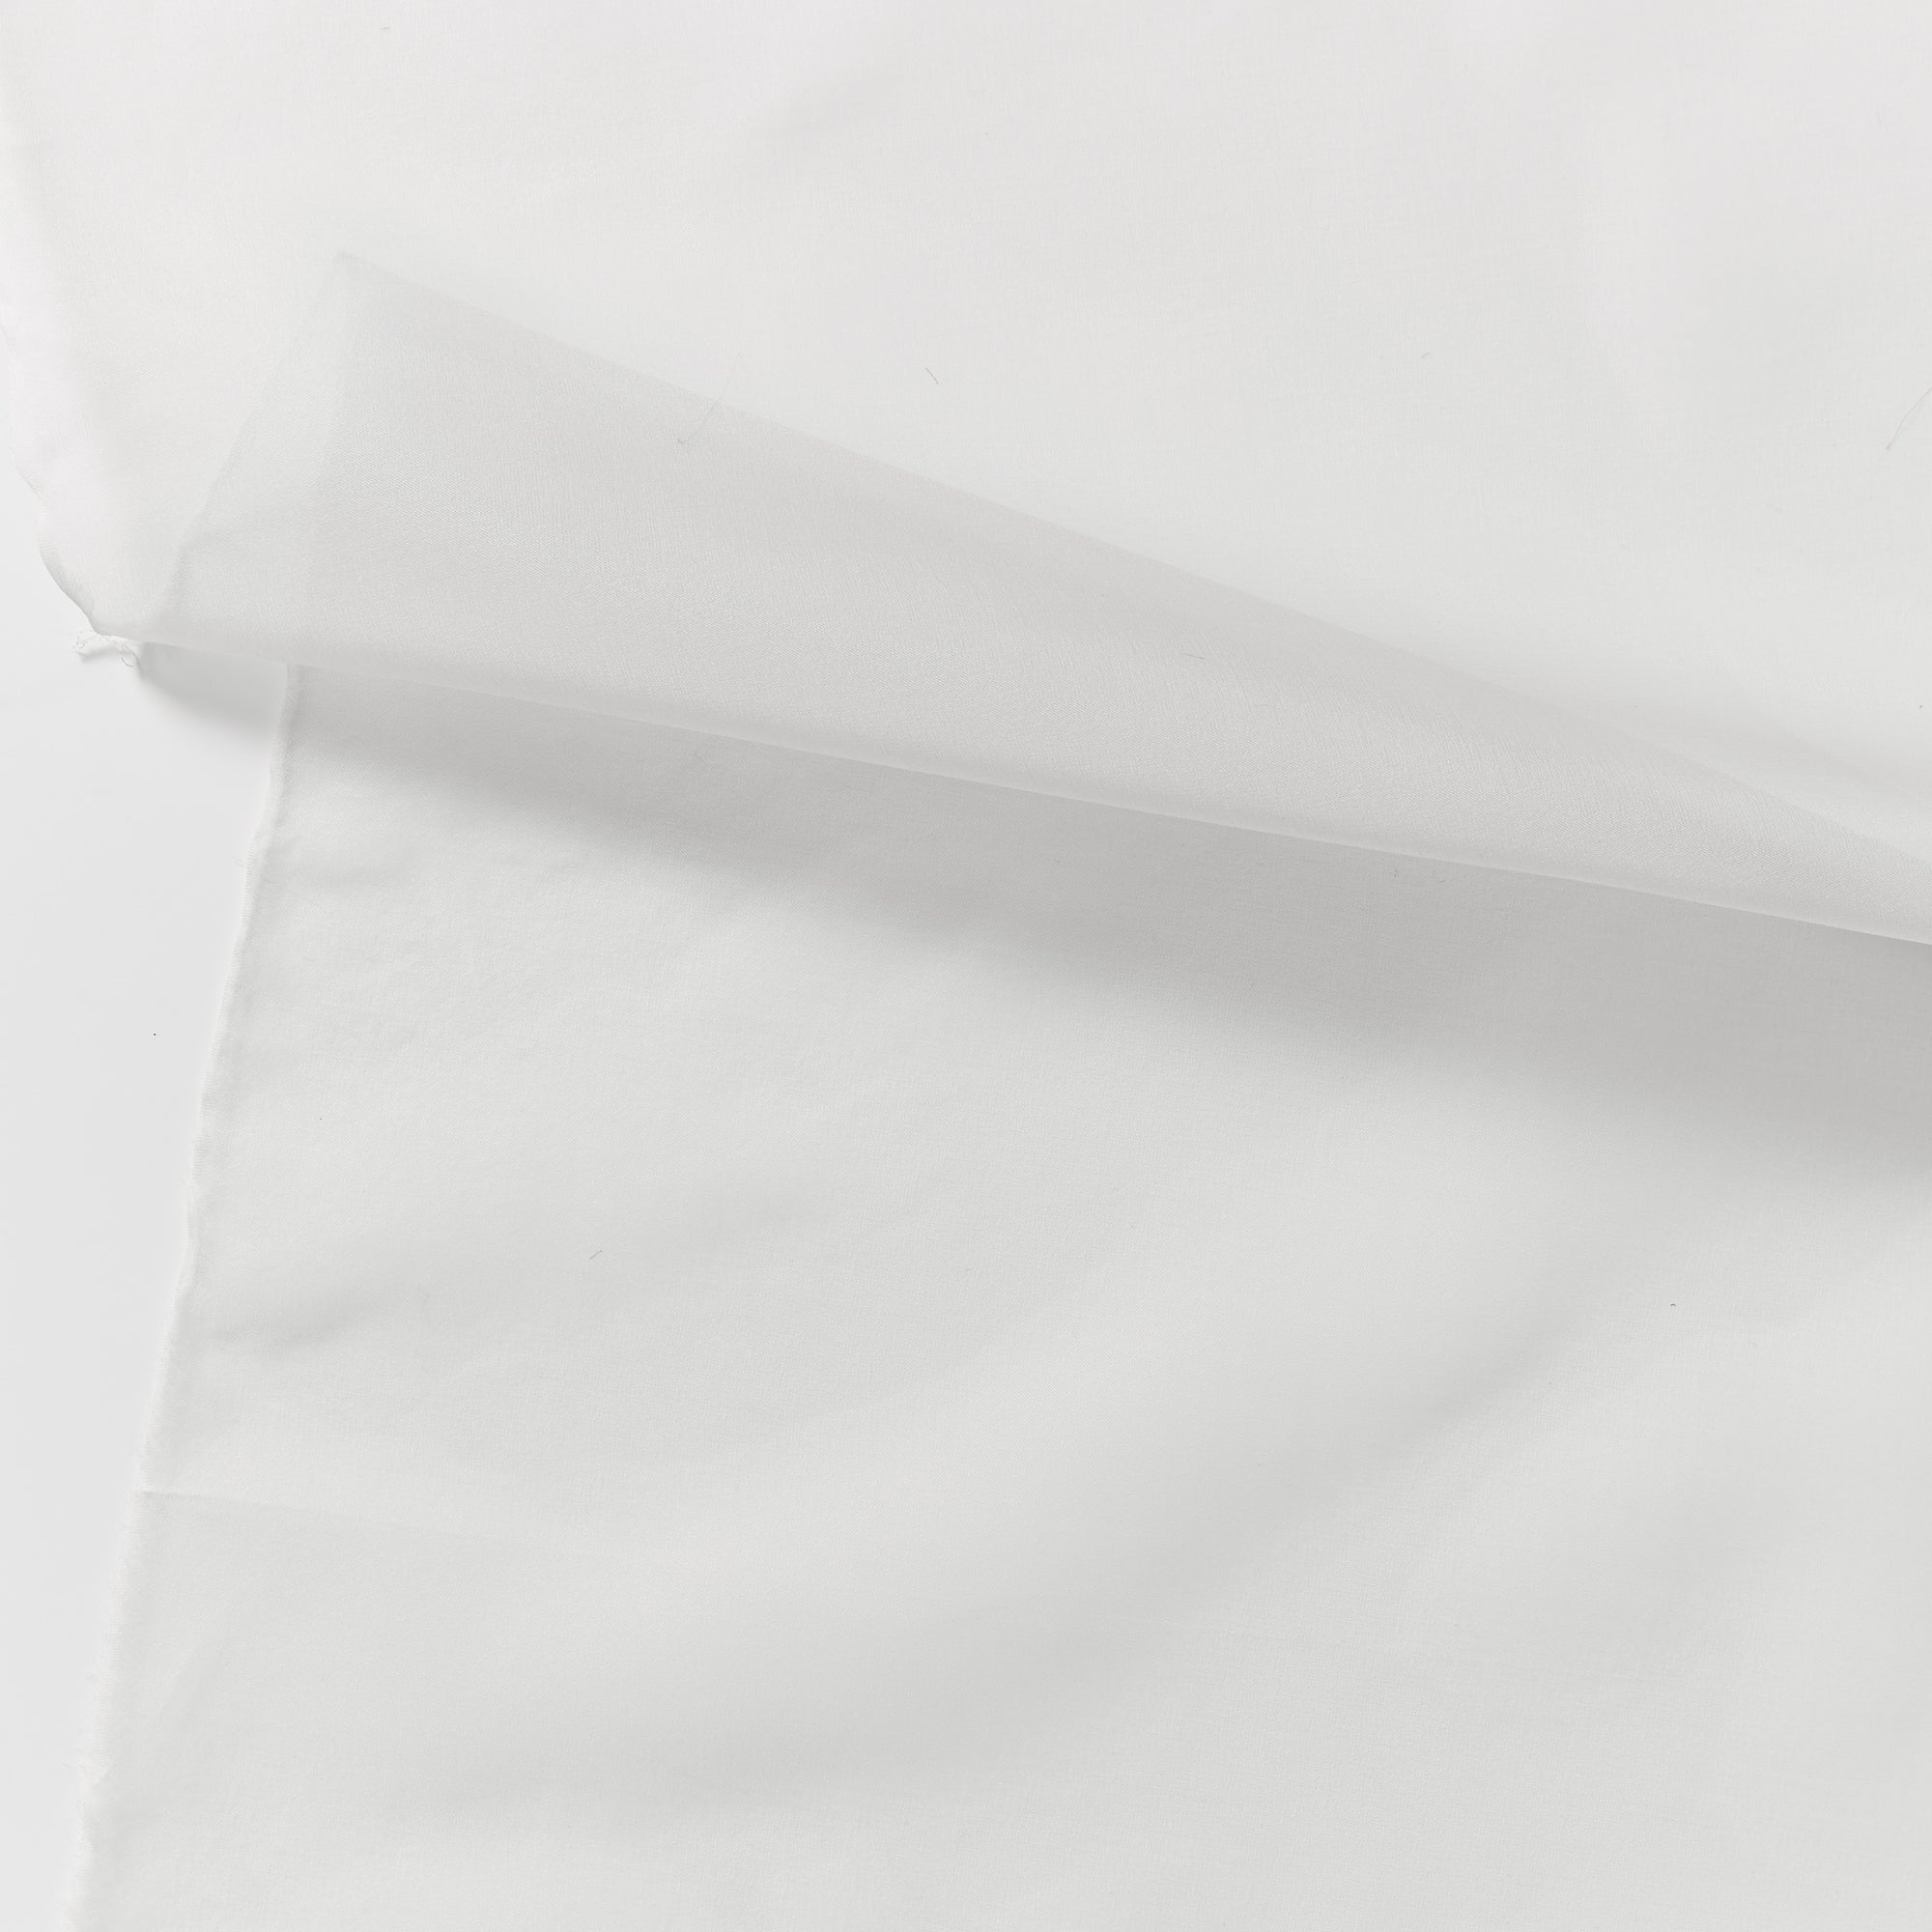 silk organza illustrating the white color version of a Lightweight stiff sheer pure silk with natural silk sheen